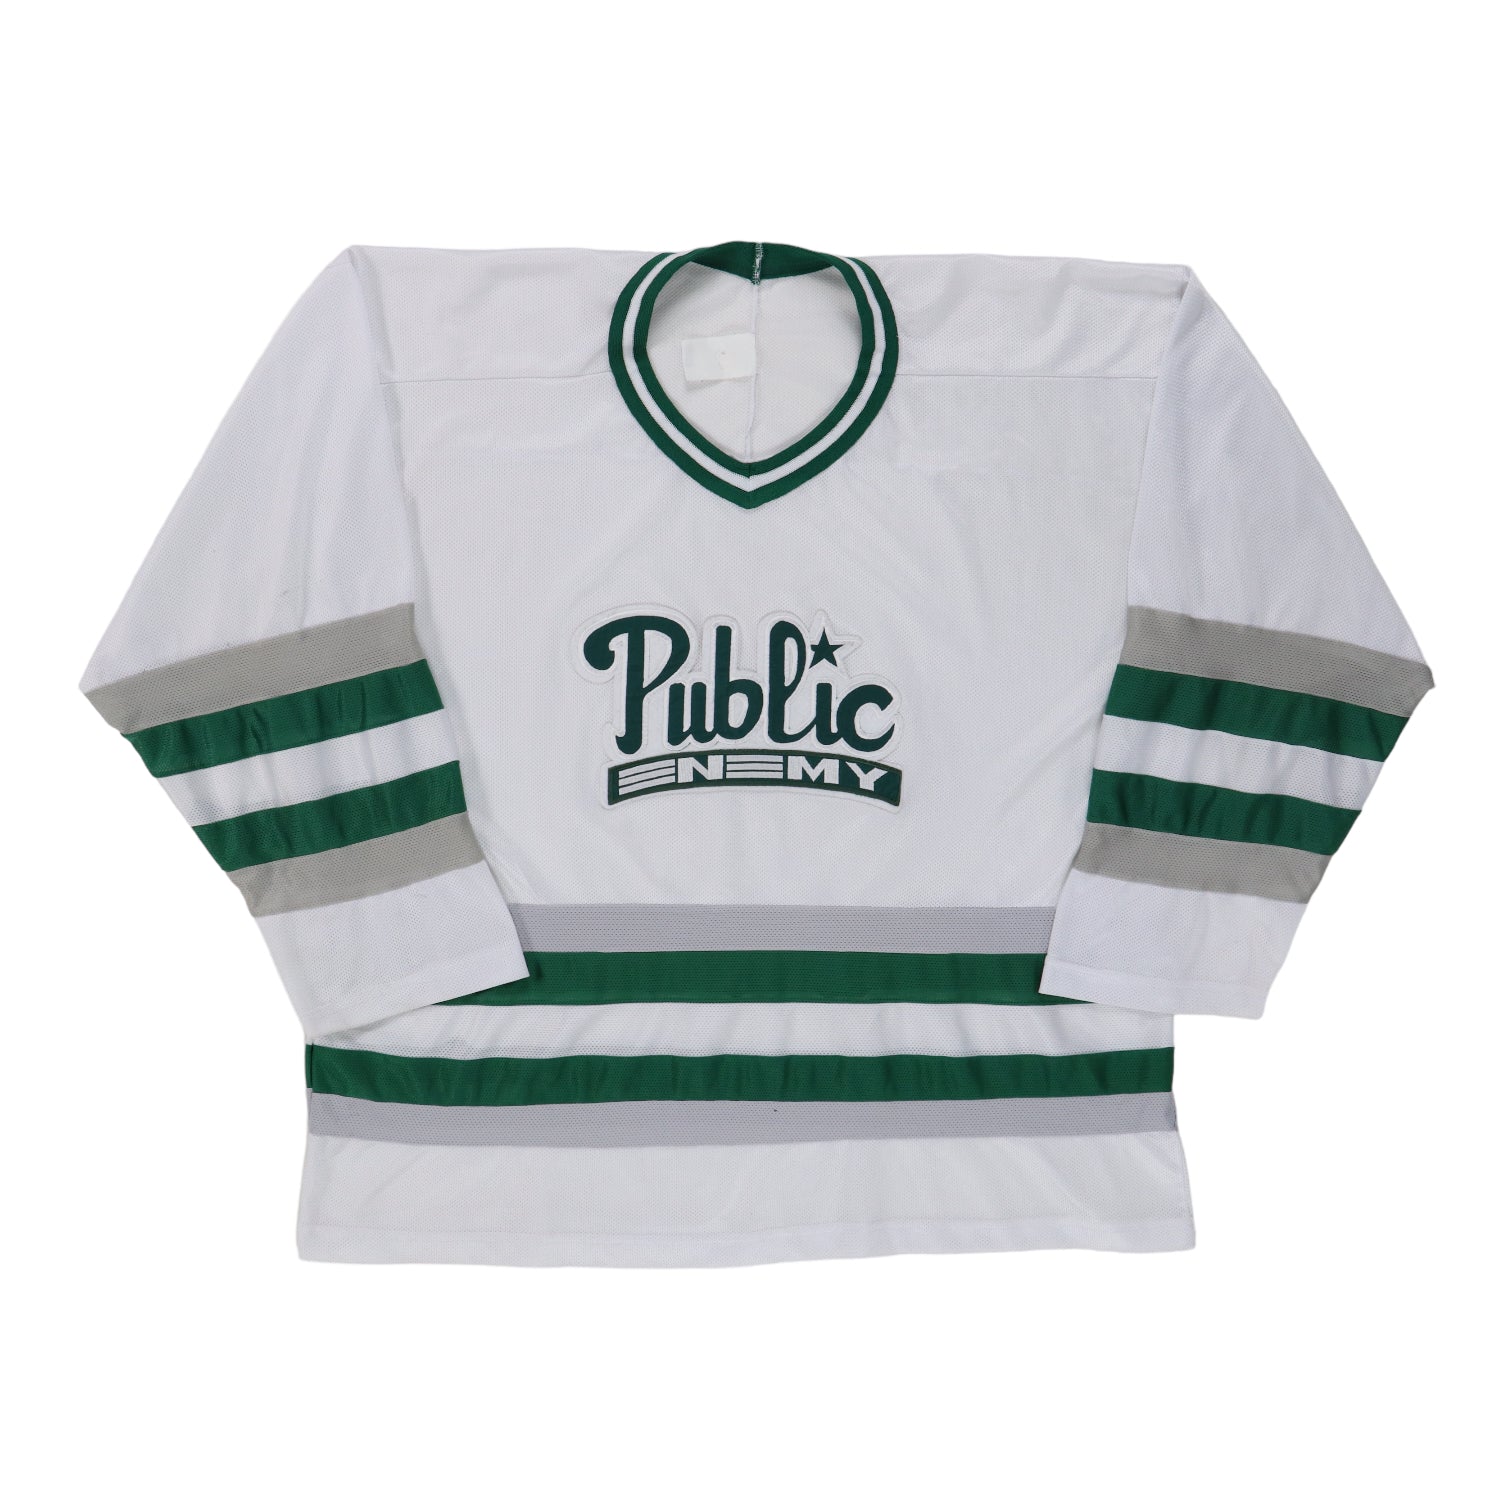 Five of the best old hockey sweaters